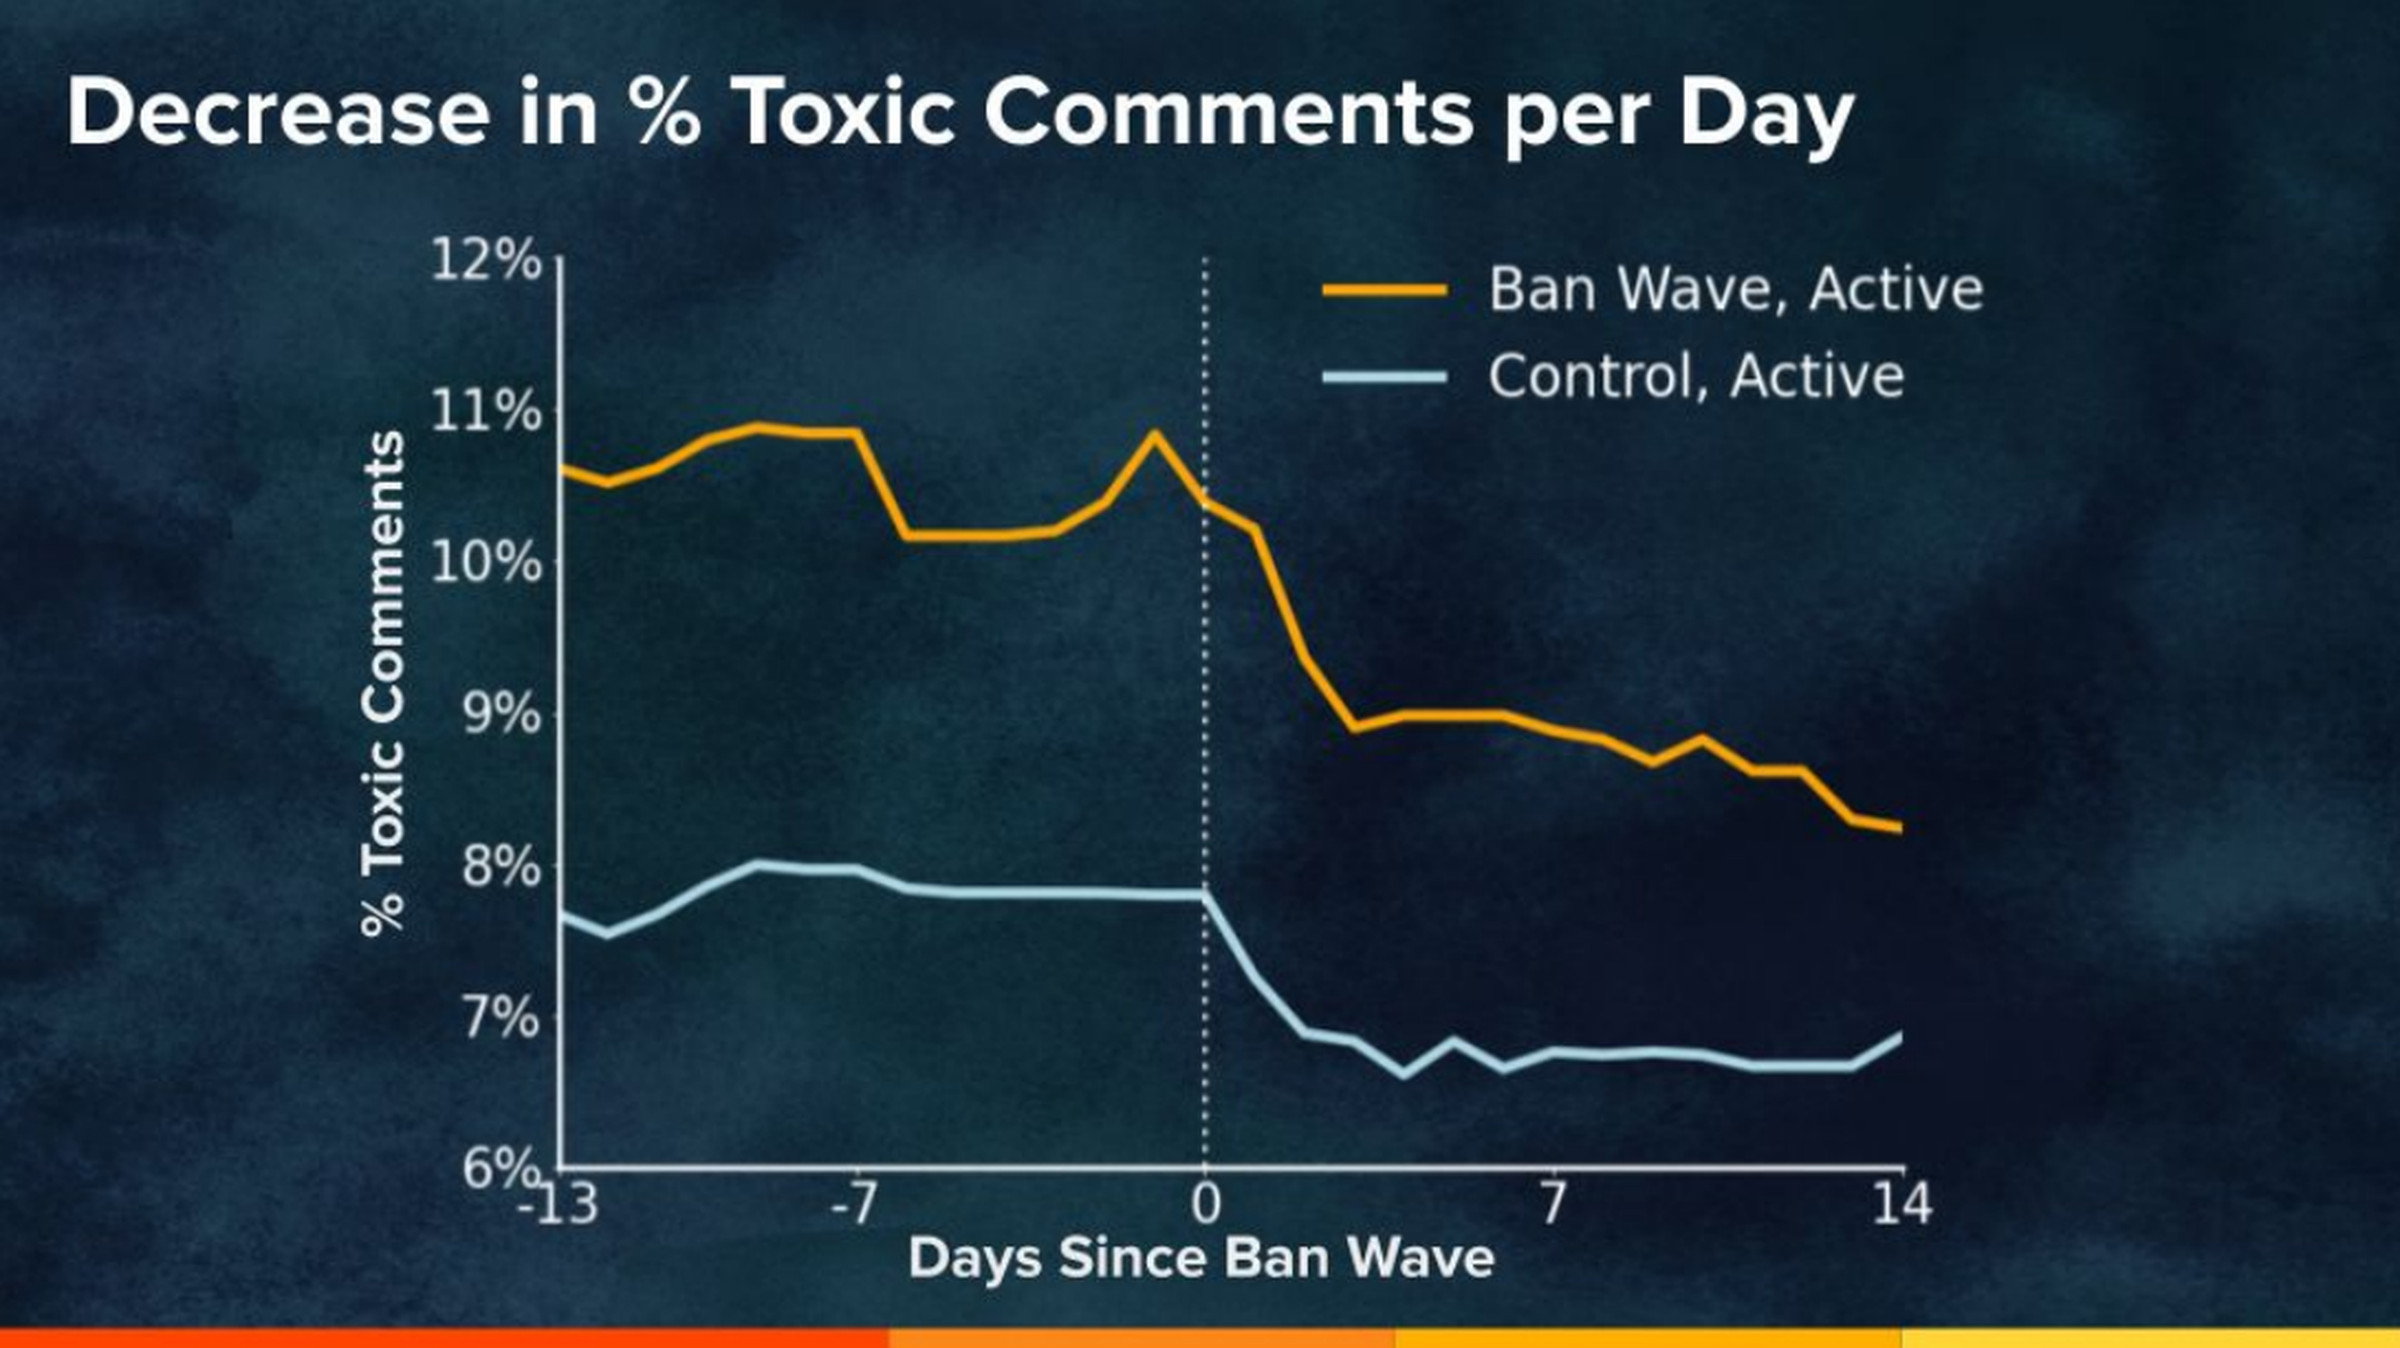 Since the “ban wave” in June, toxic comments posted on Reddit have fallen. 